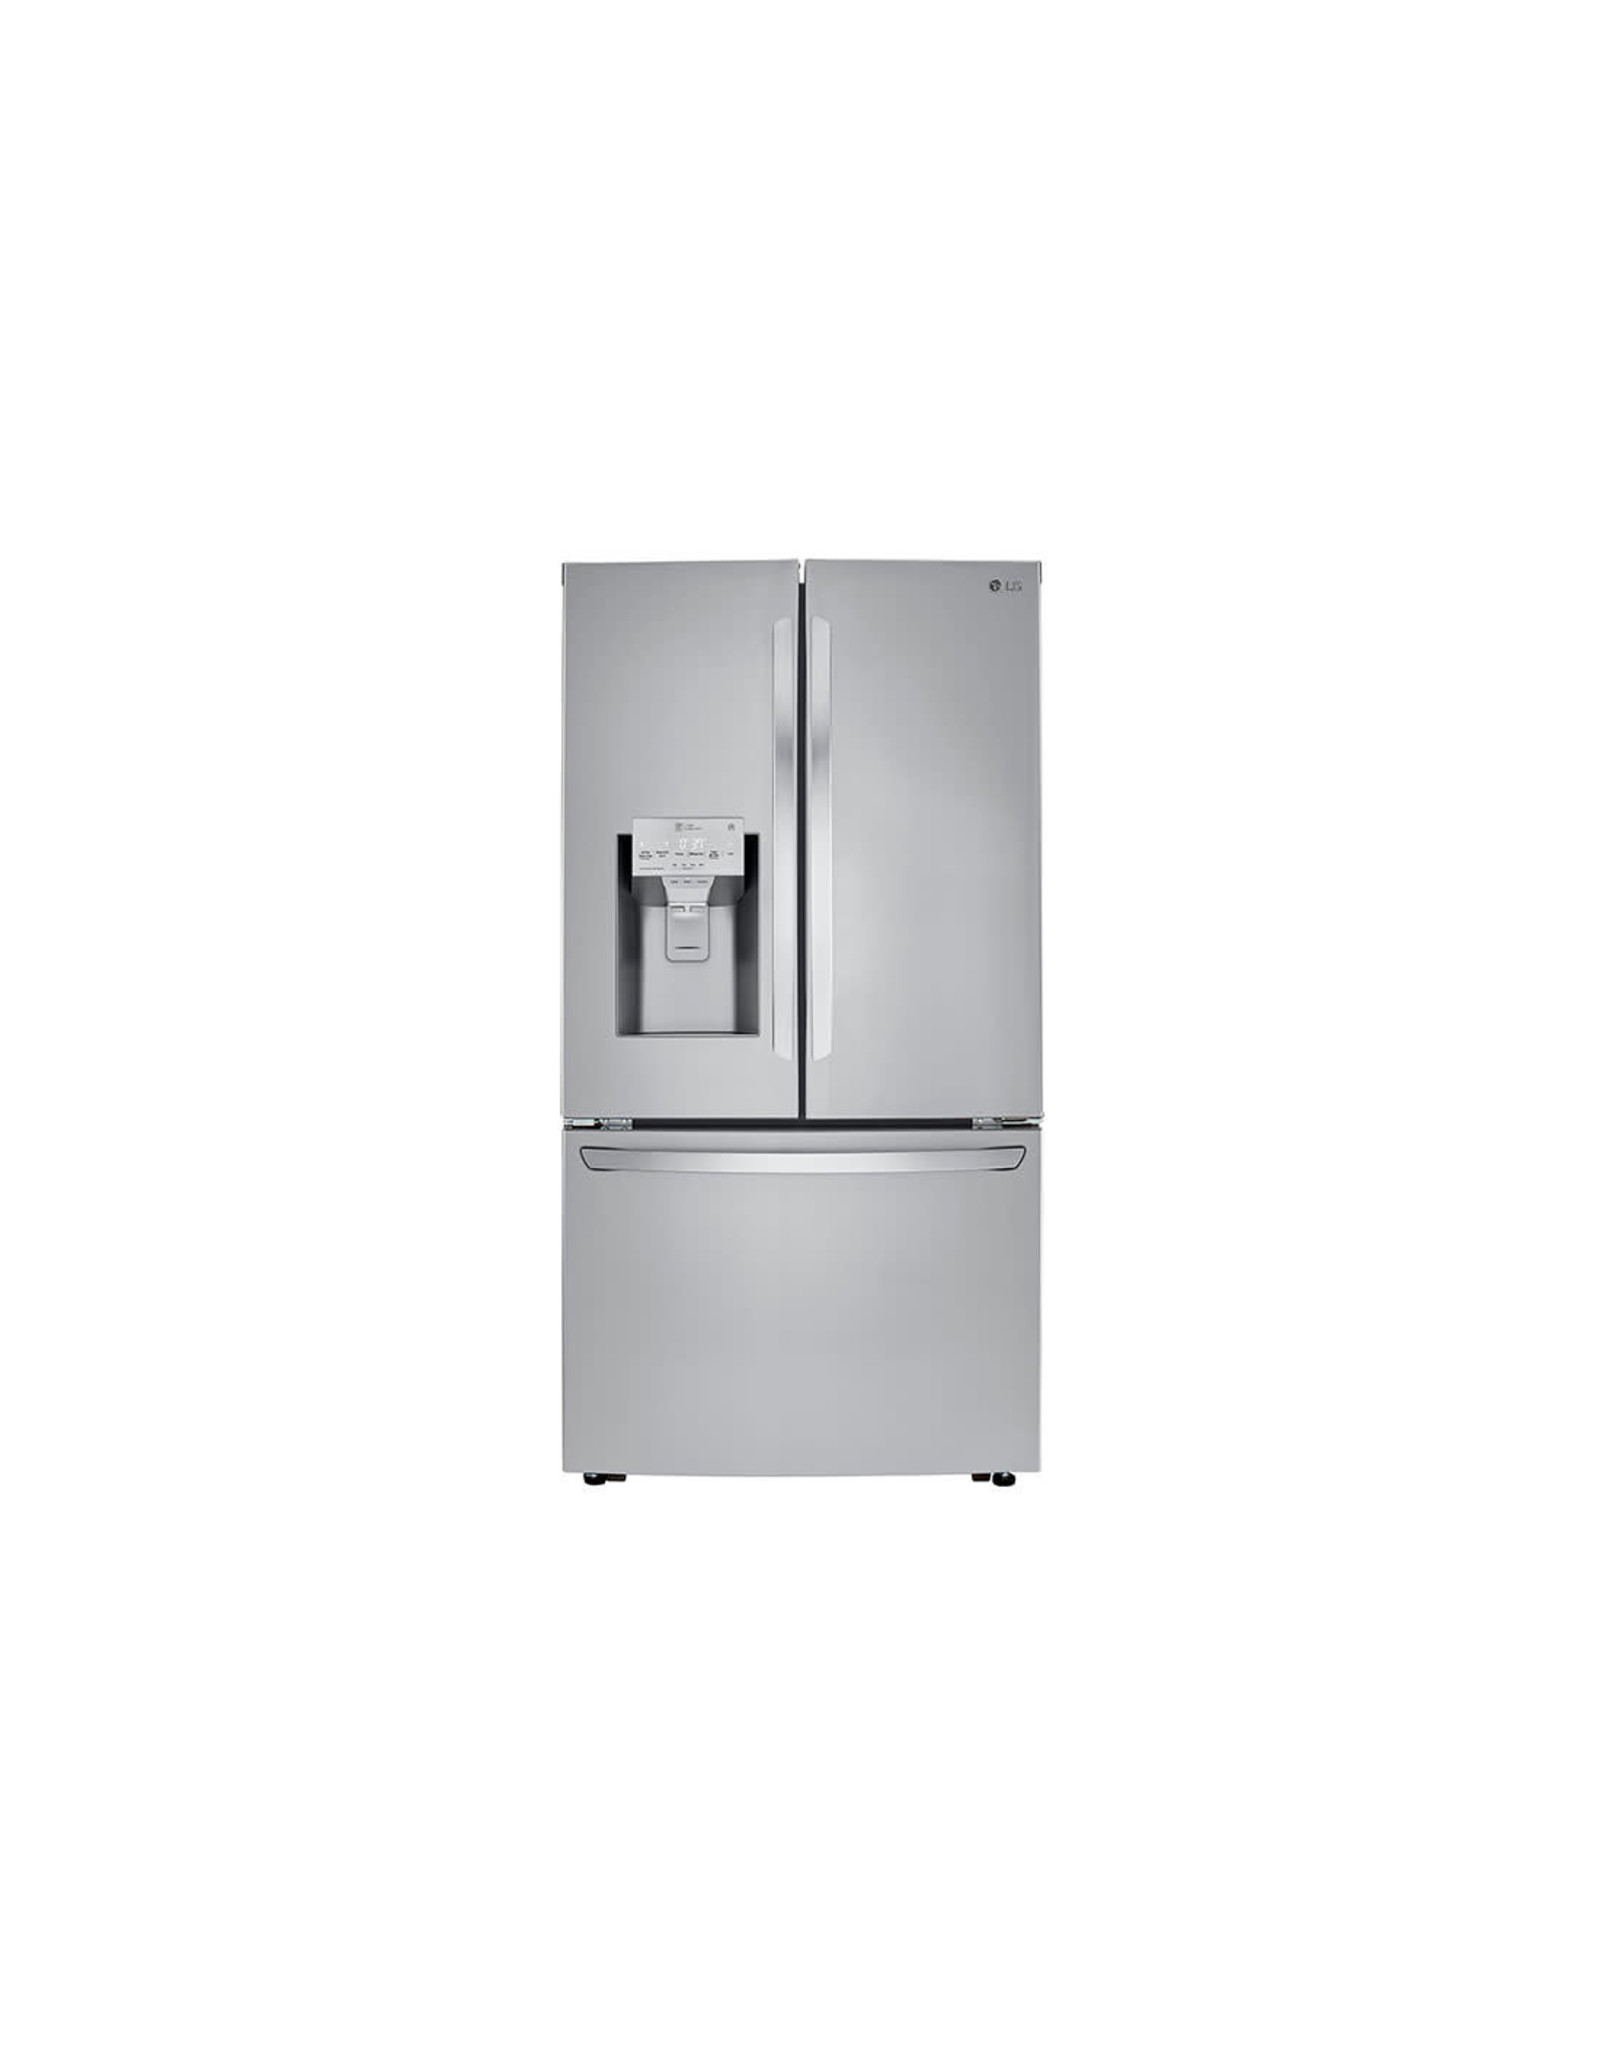 LG Electronics Ck. LRFXC2416S 23.5 cu. ft. Smart French Door Refrigerator, Dual Ice Makers with Craft Ice in PrintProof Stainless Steel, Counter Depth